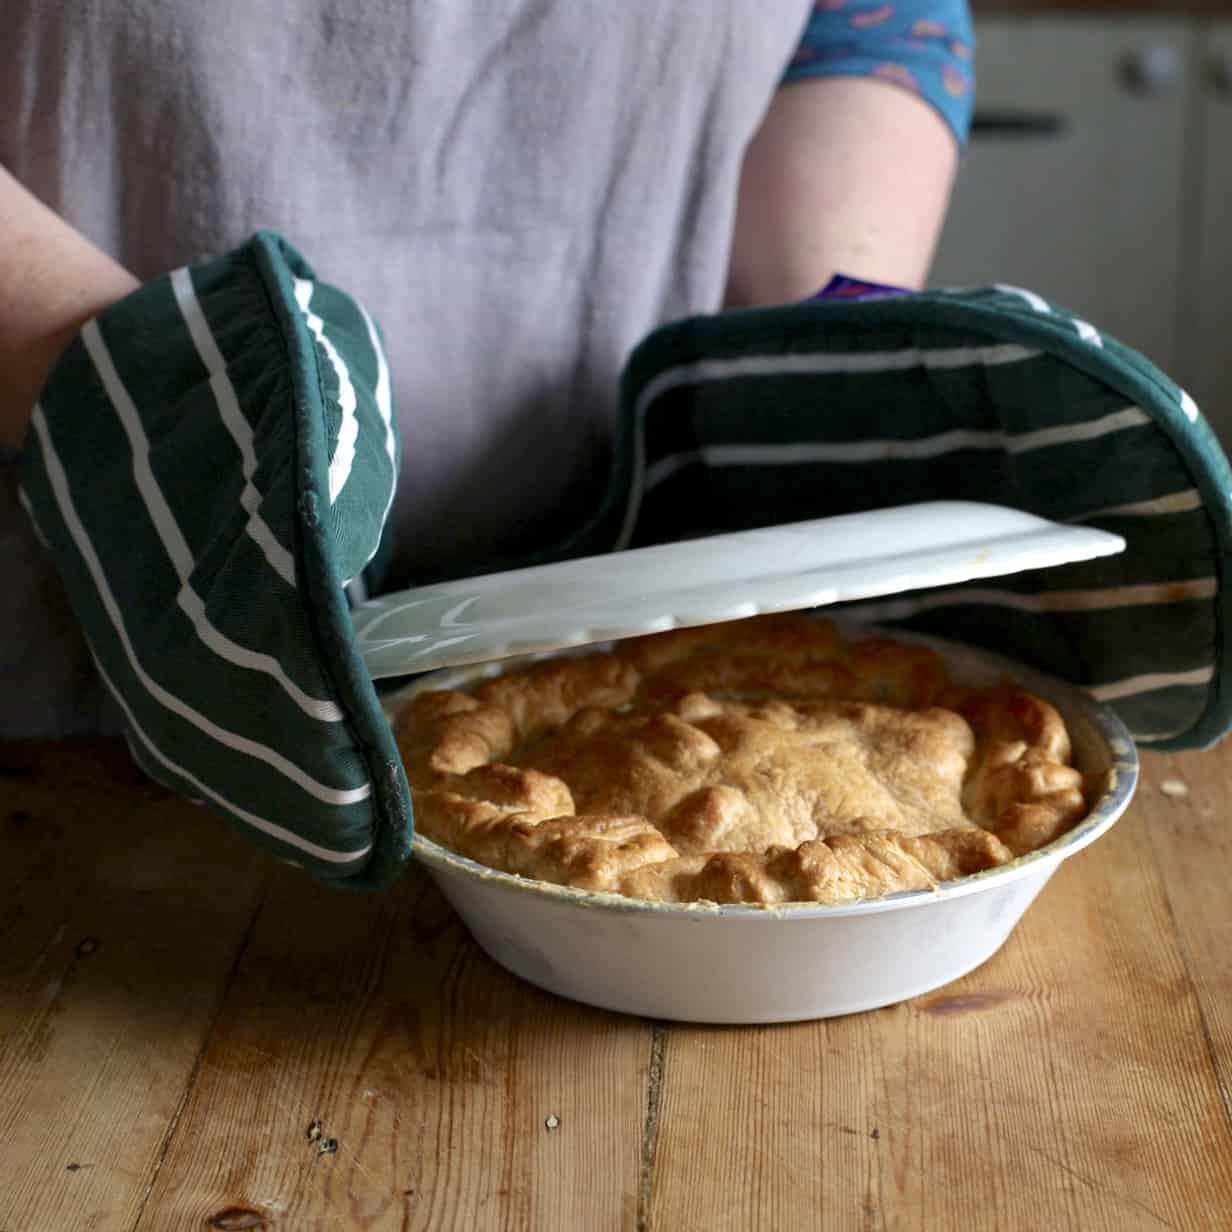 Woman wearing green oven gloves placing a plate over a pie dish filled with a hot rhubarb tart ready to flip it out